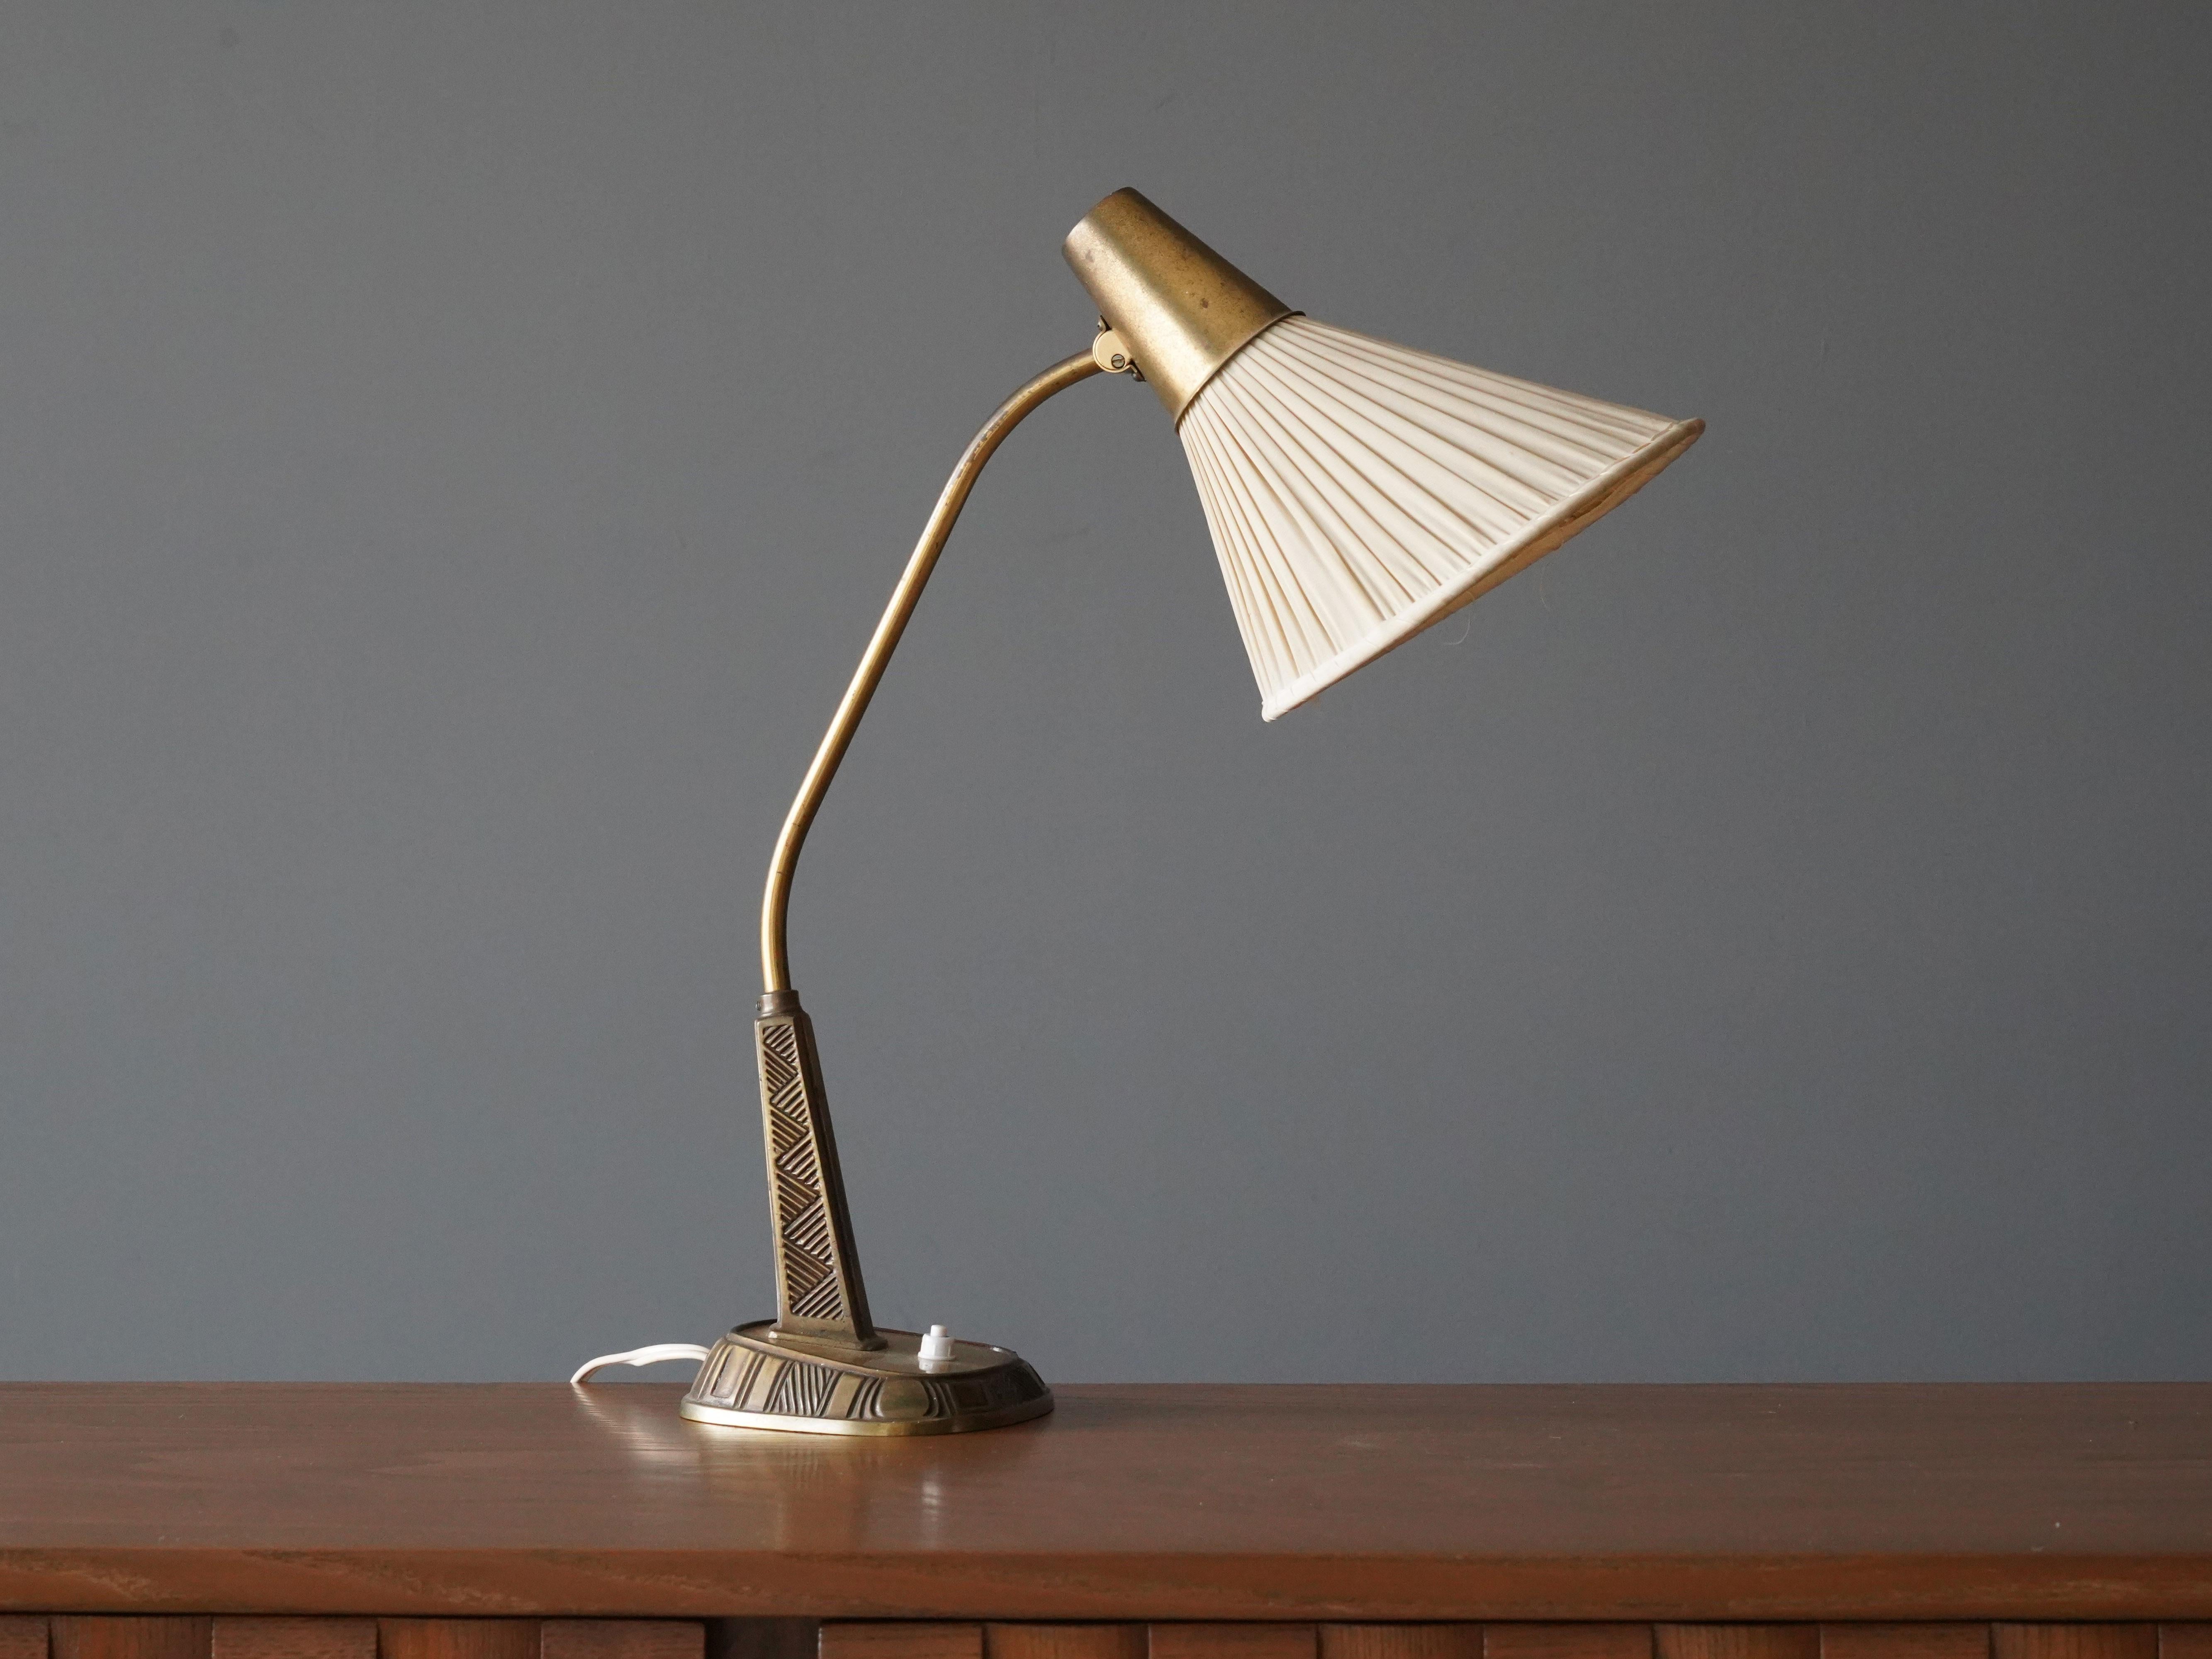 An adjustable table lamp / desk light. Designed by Swedish sculptor Sonja Katzin, (1919-2014). Produced by ASEA, Sweden, 1950s.

Executed in brass, original fabric screen.